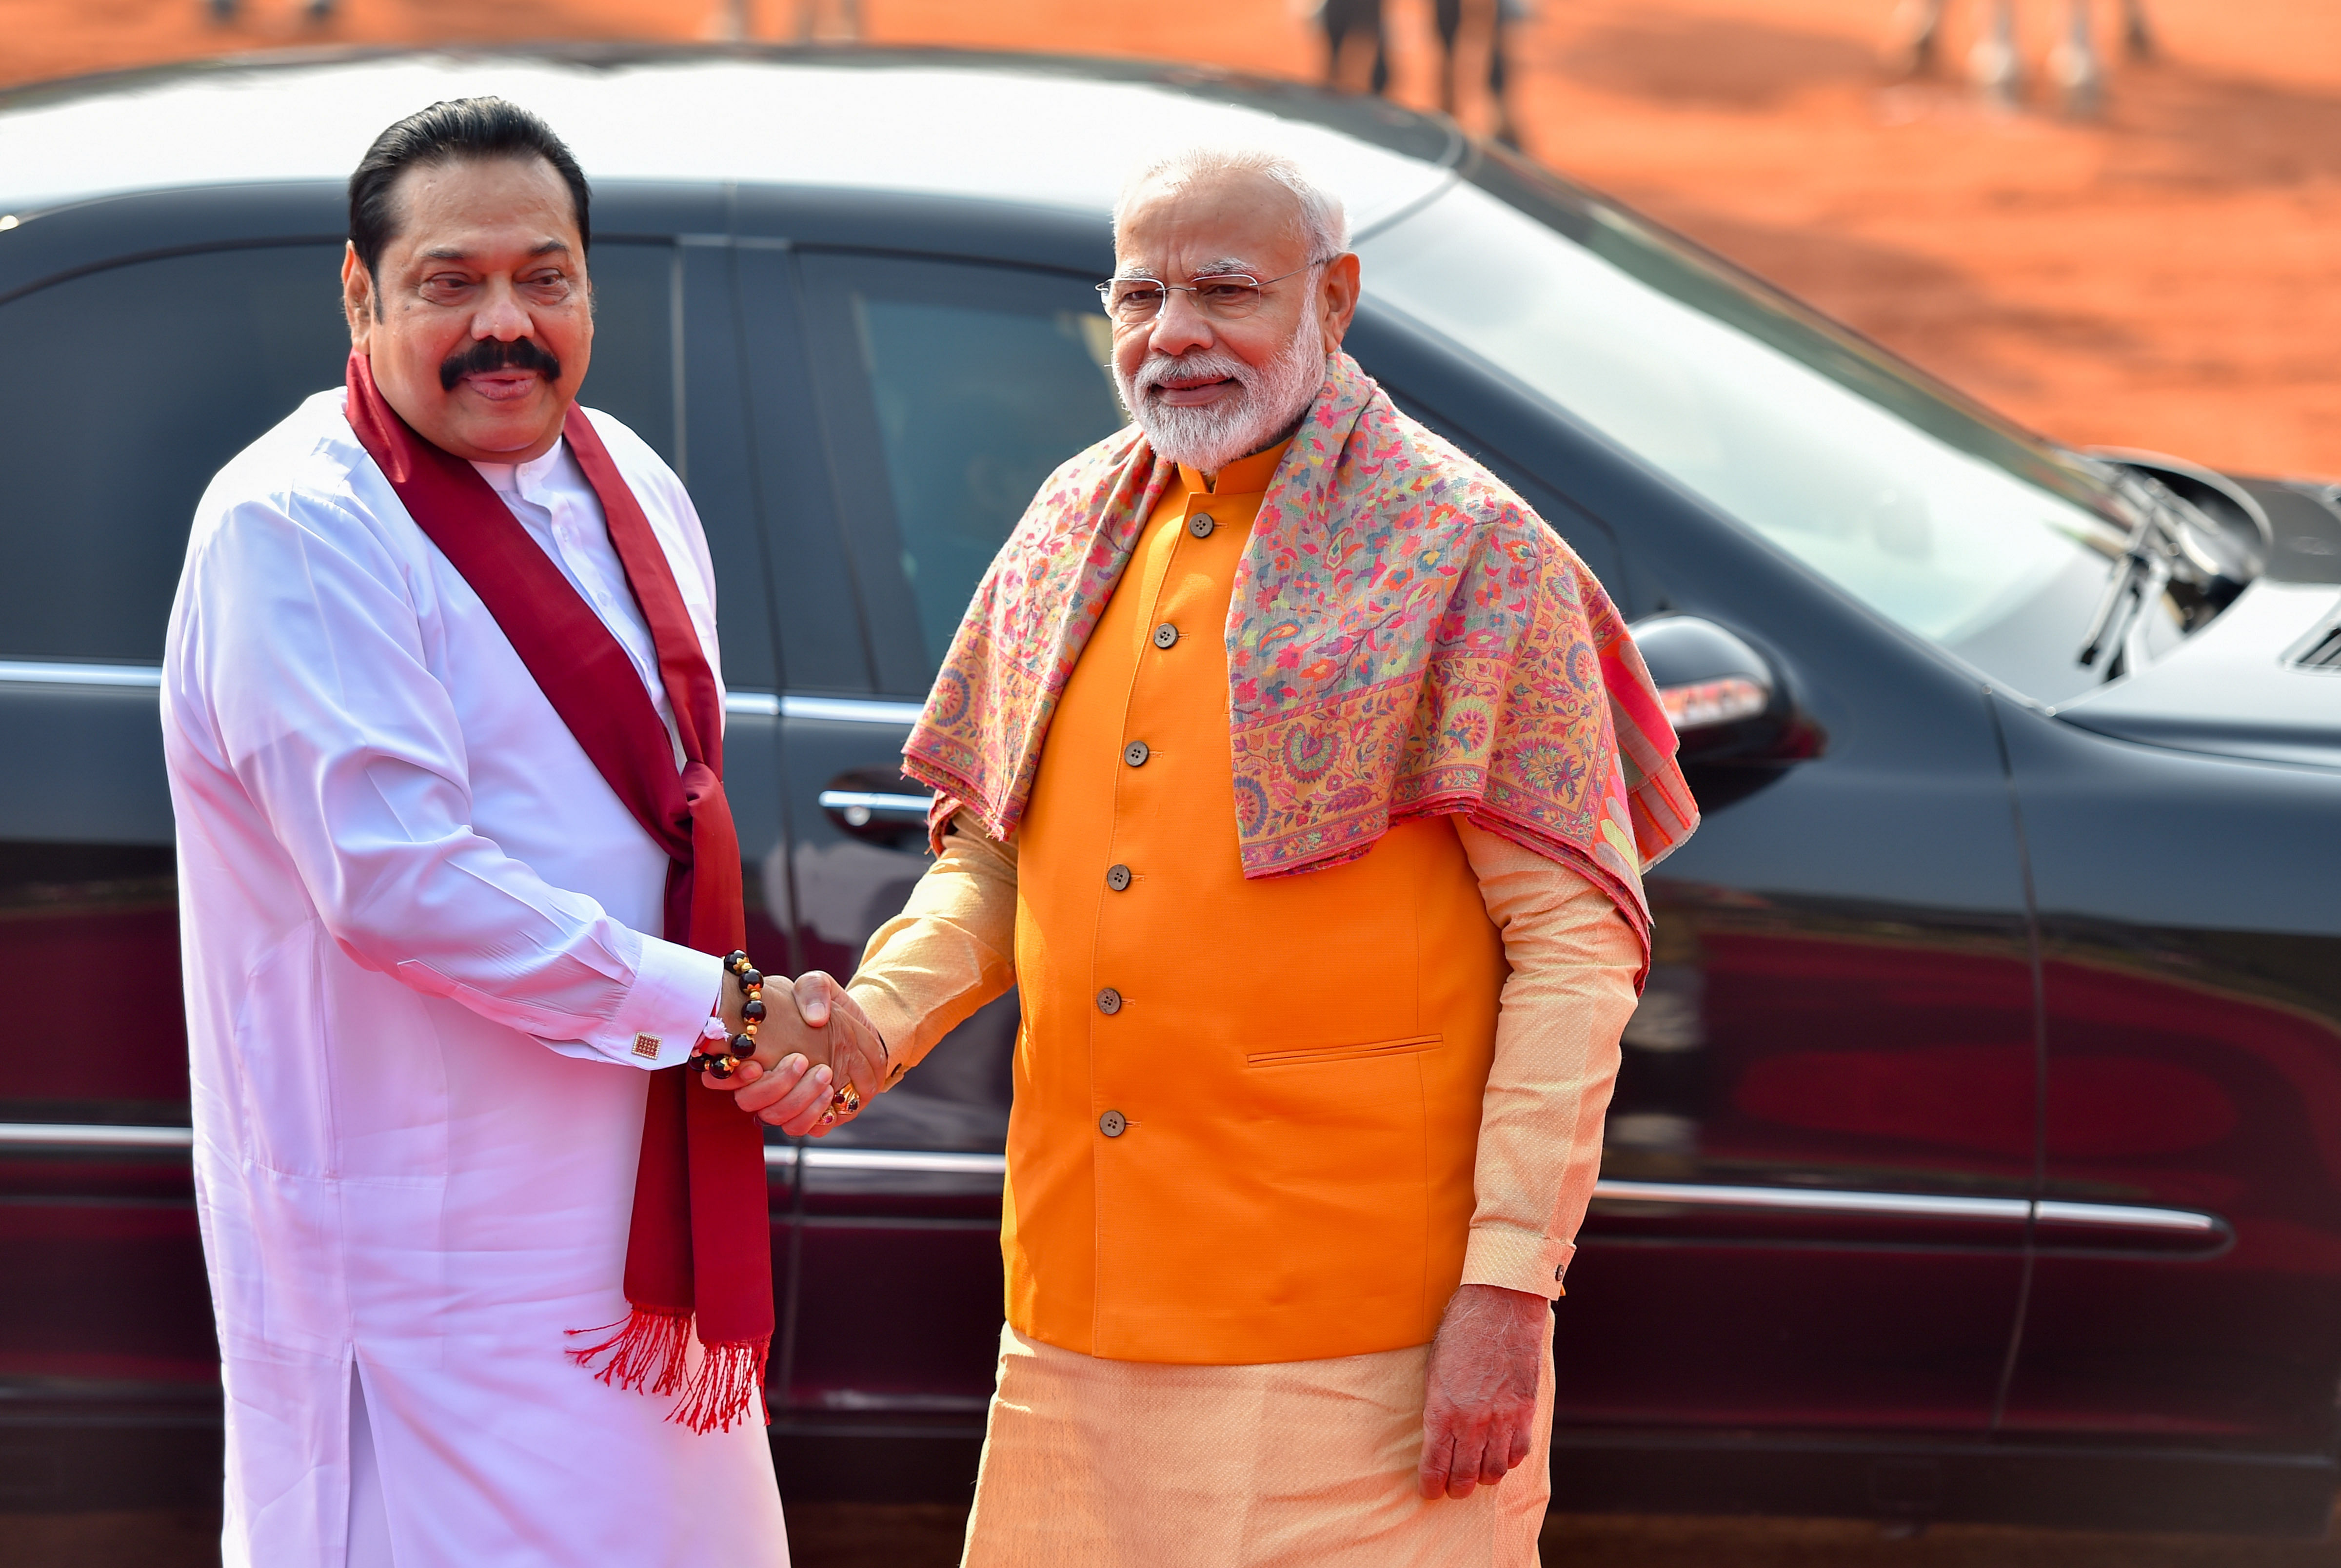 Modi recalled Rajapaska's contributions to the development of Sri Lanka in his long political career and wished him all the best for his future. (Credit: PTI File Photo)